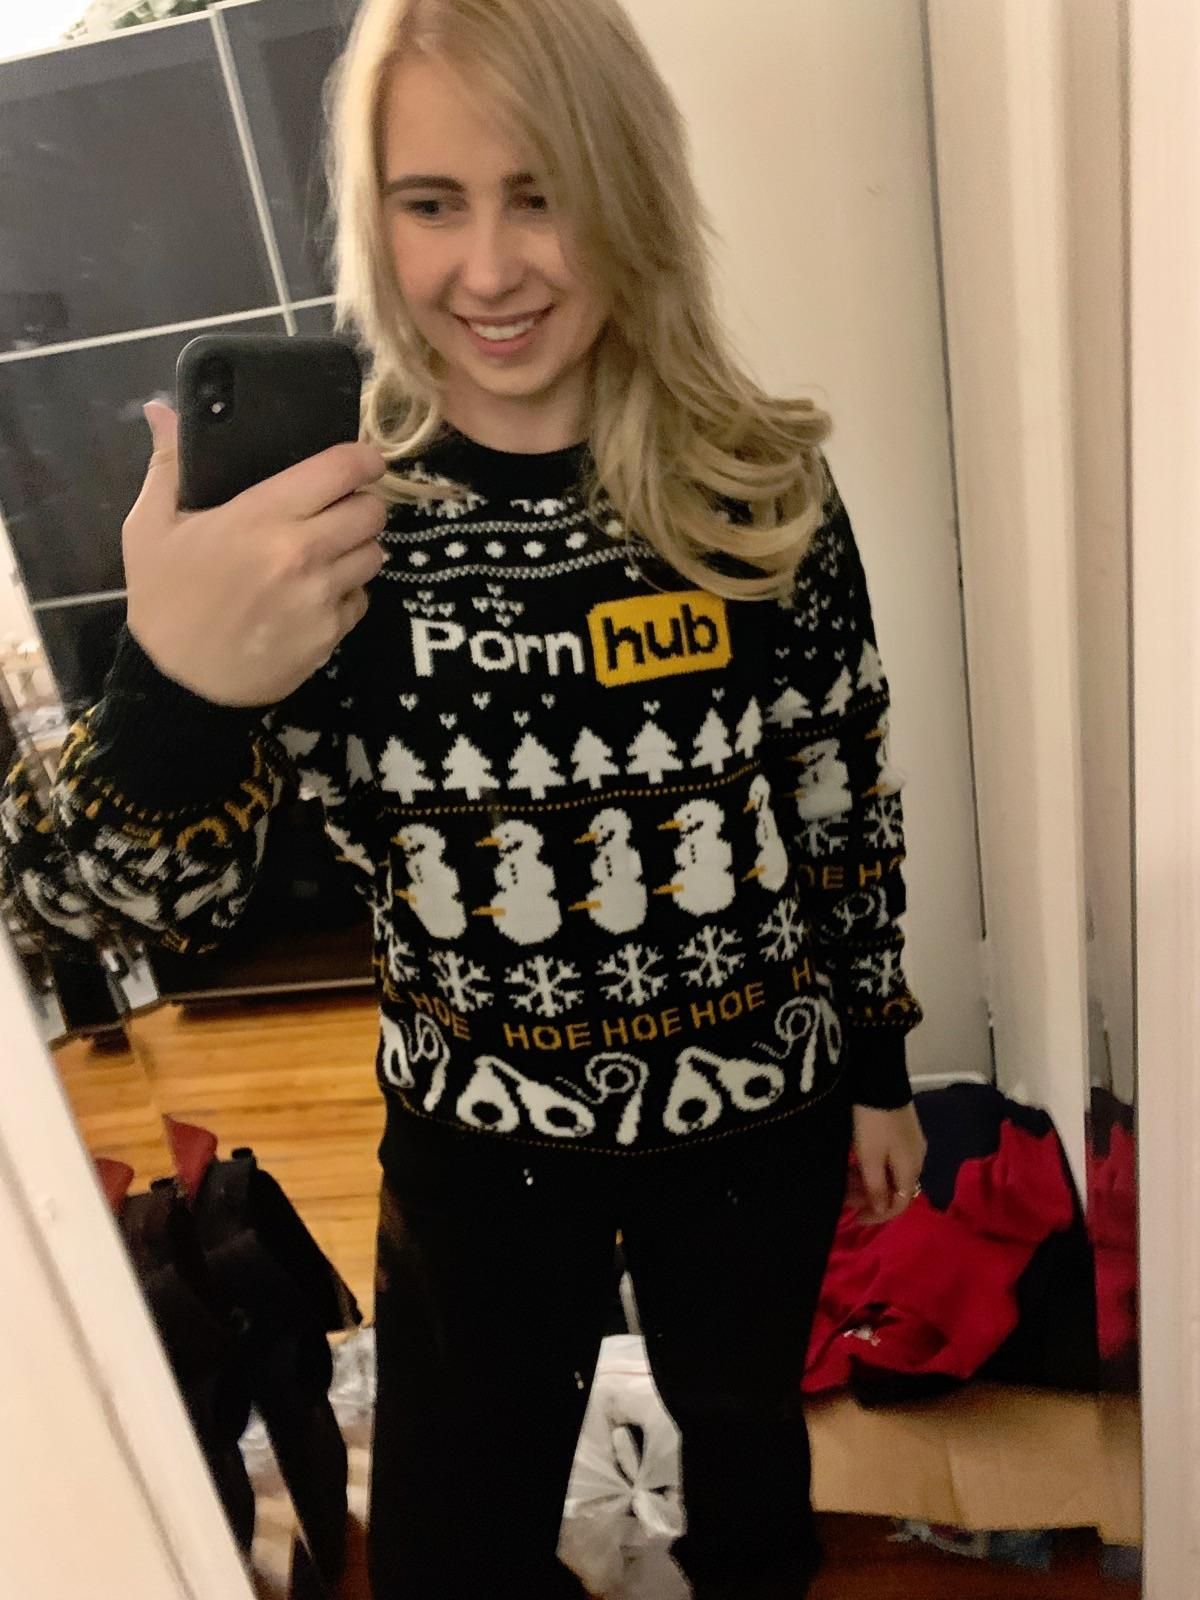 I’m going to kill it at the office sweater party this year